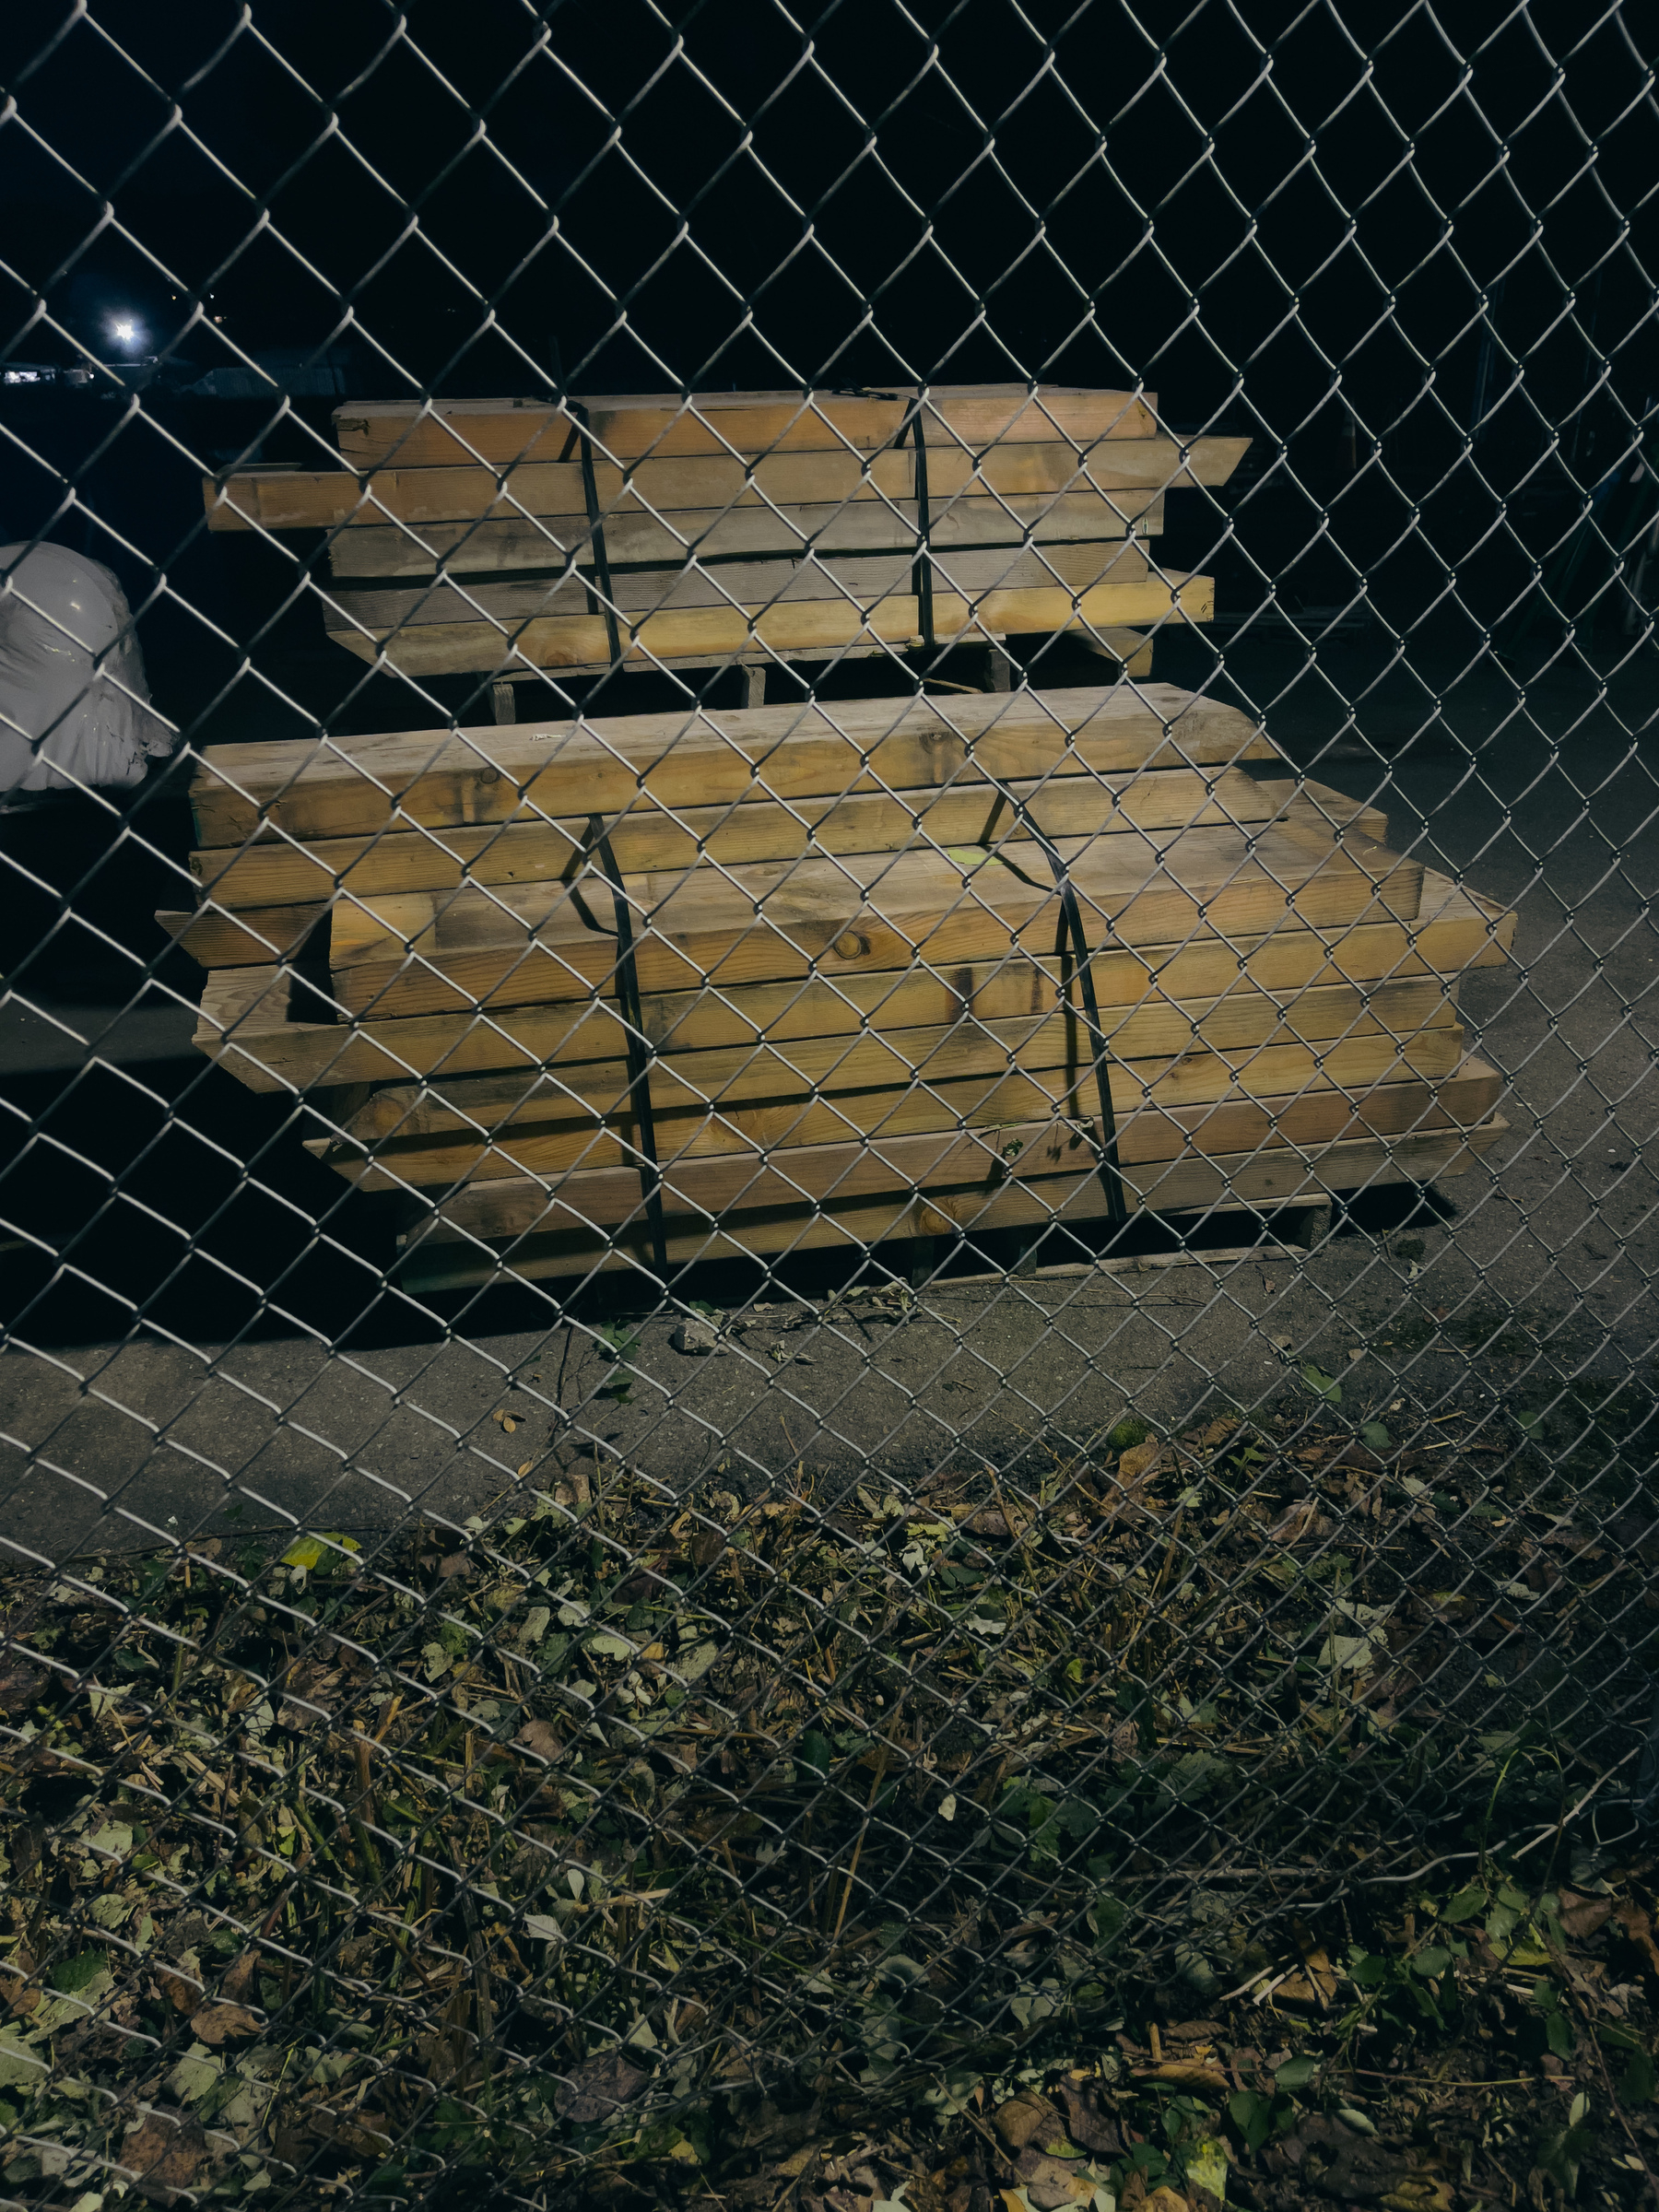 Heavy timber lumber stacked behind chain link fence.